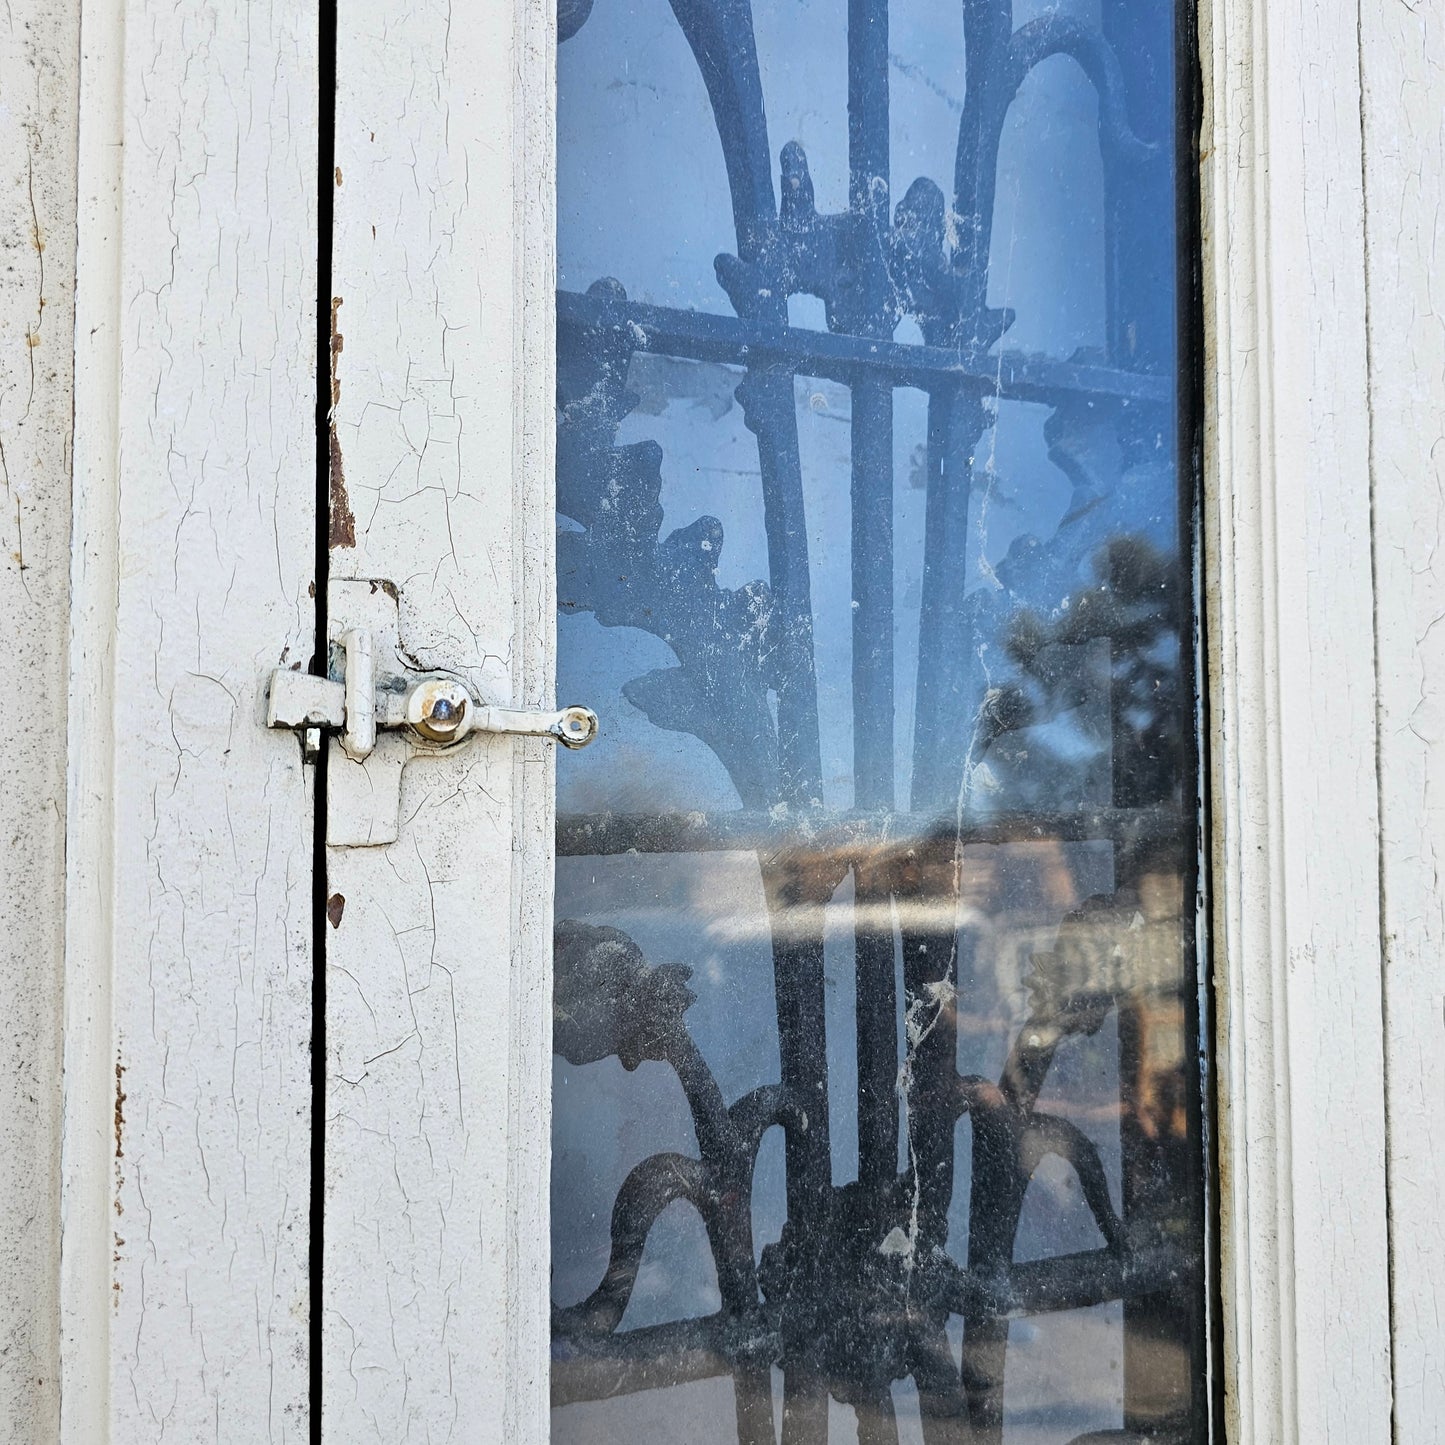 Single French Door with Iron Inserts